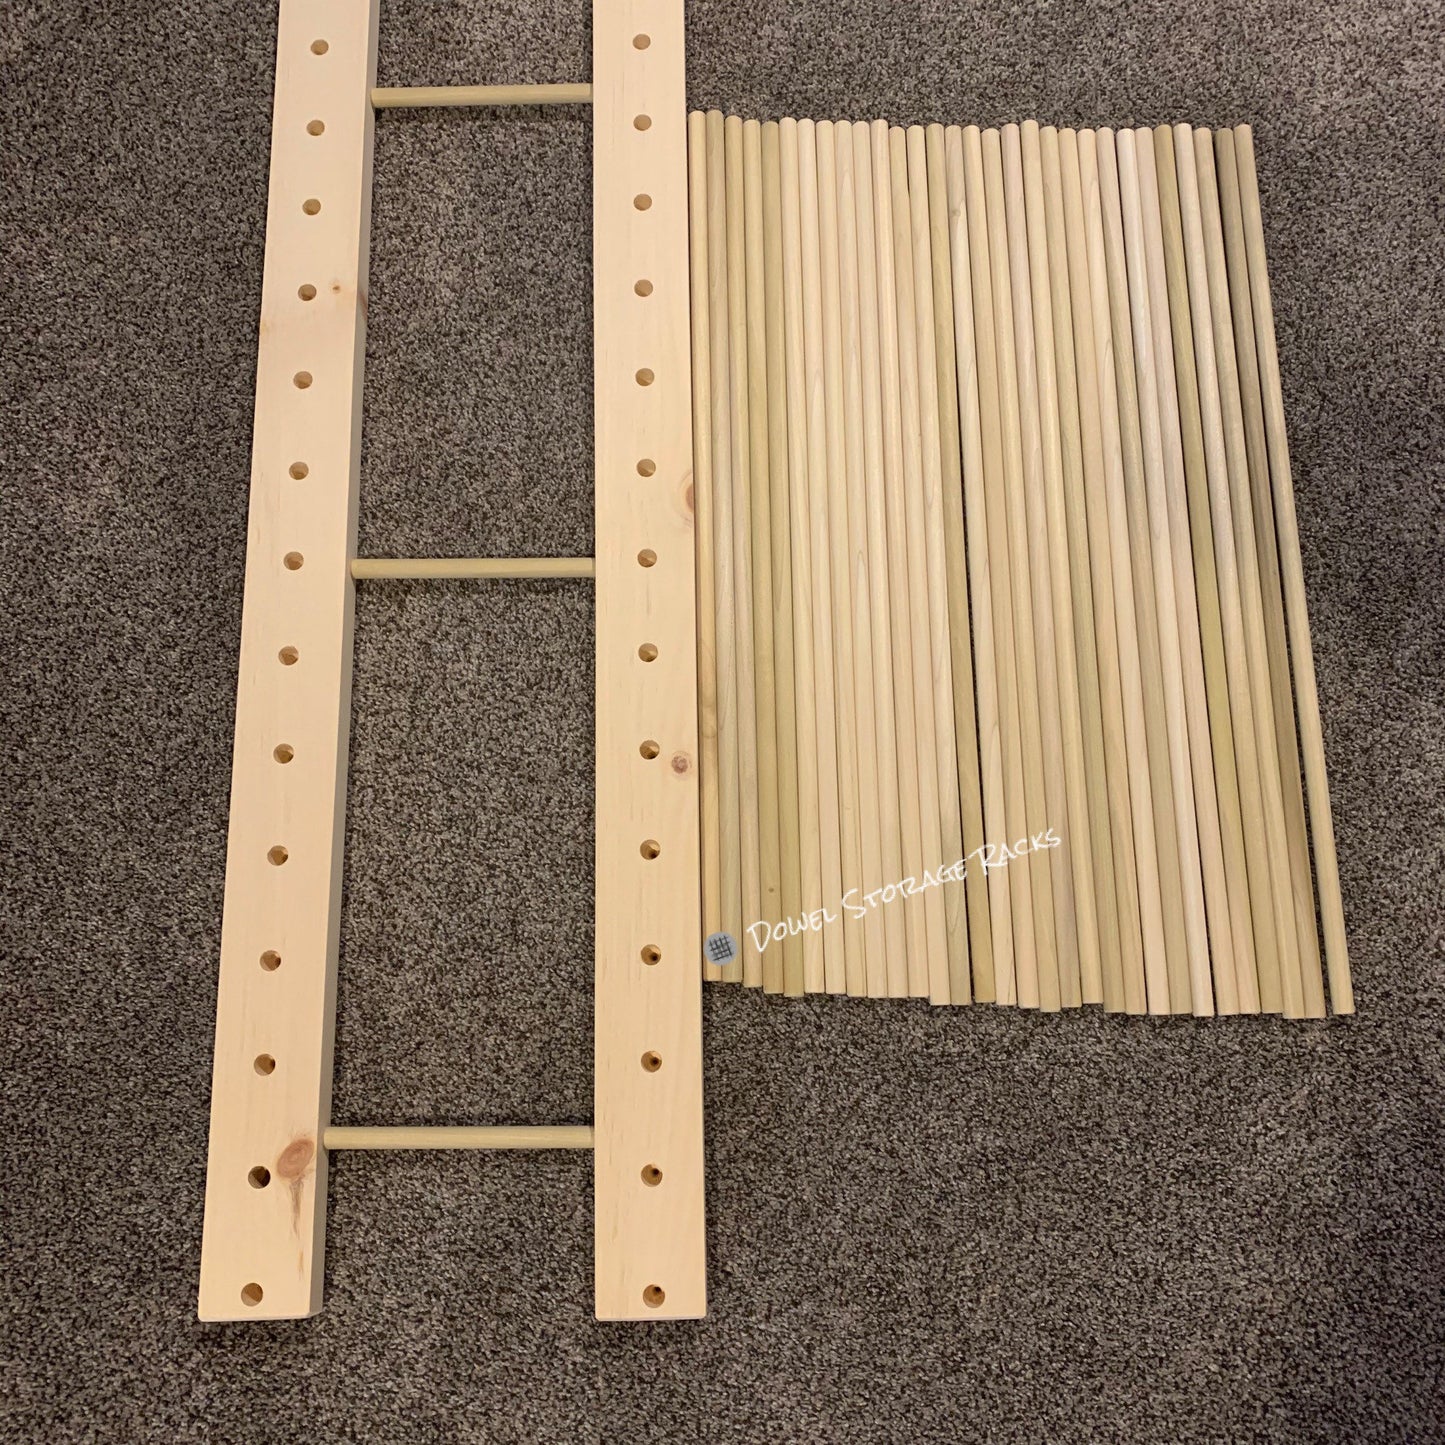 Buy Art Storage Rack 36 Long X 11 Wide With 24 Tall Dowels for